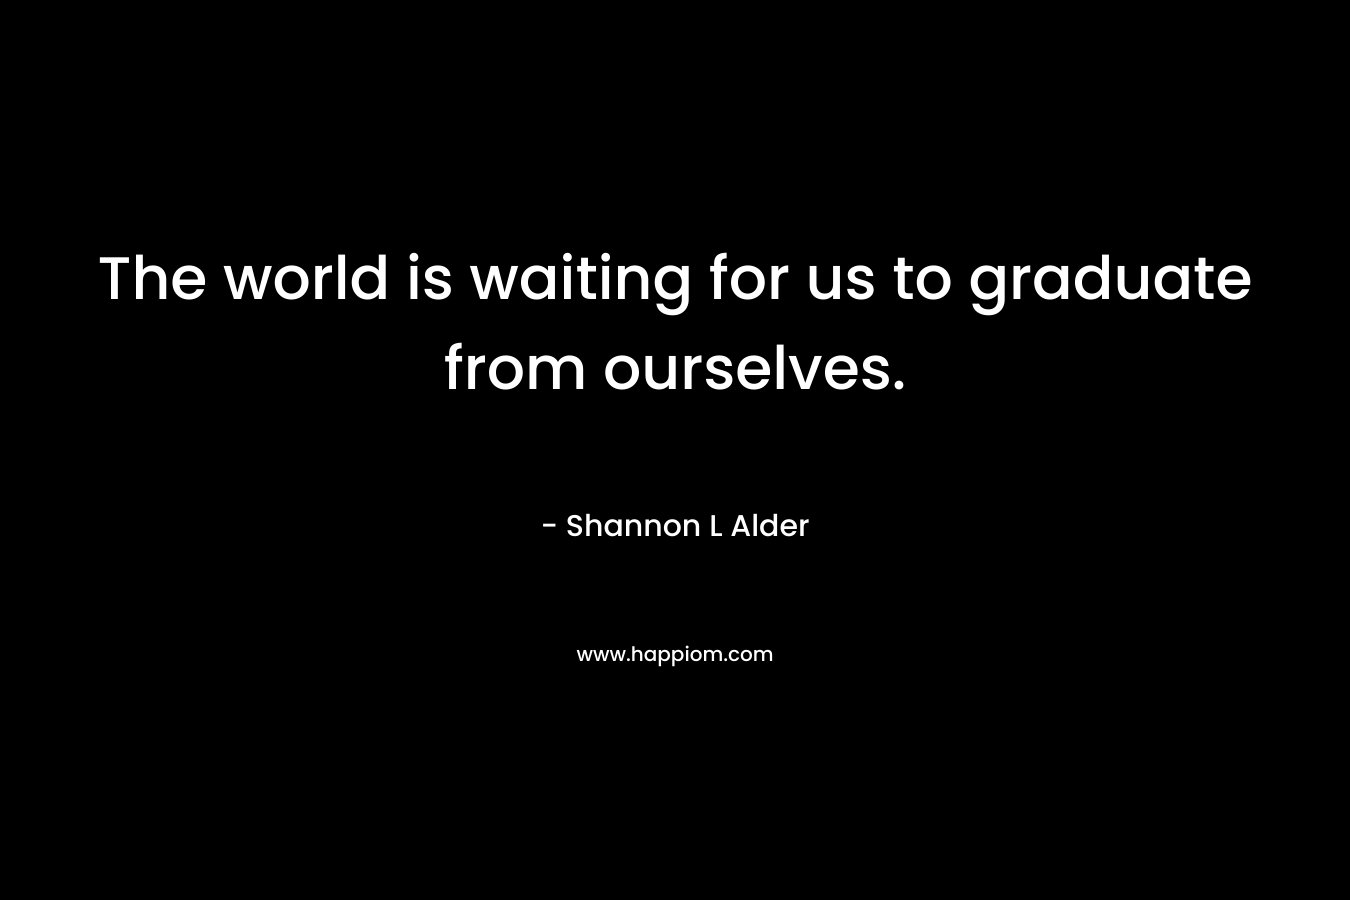 The world is waiting for us to graduate from ourselves.